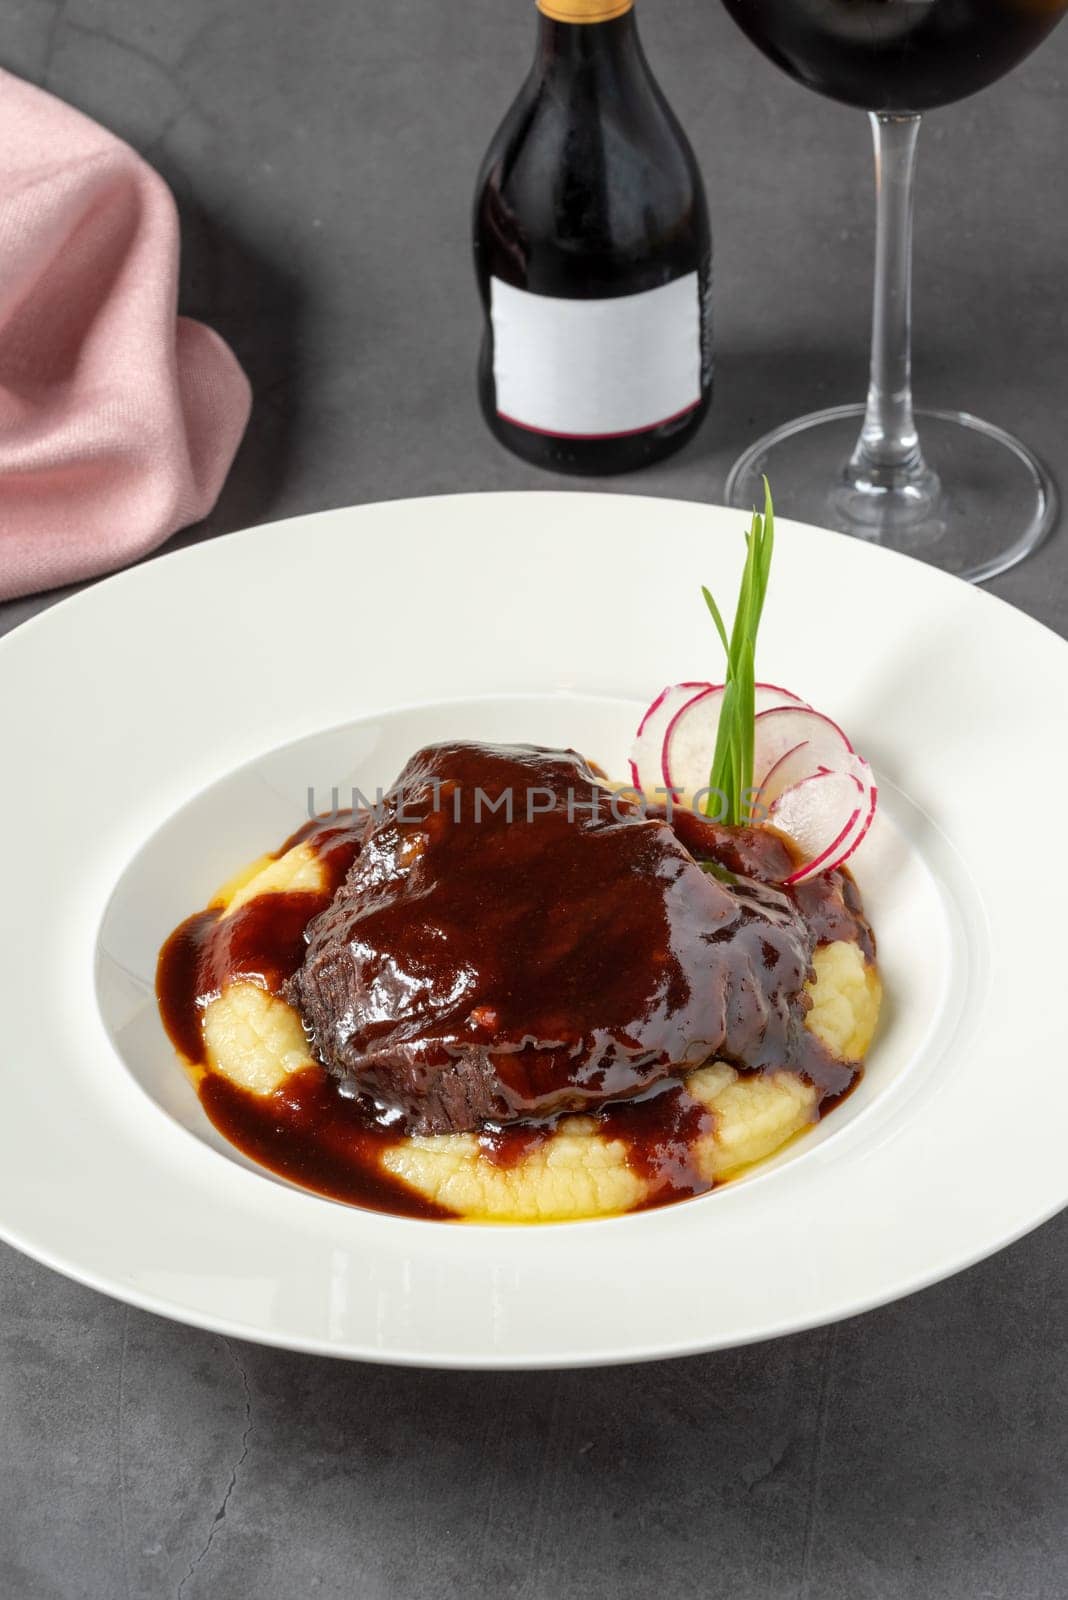 Veal cheek served in a fine dining restaurant by Sonat